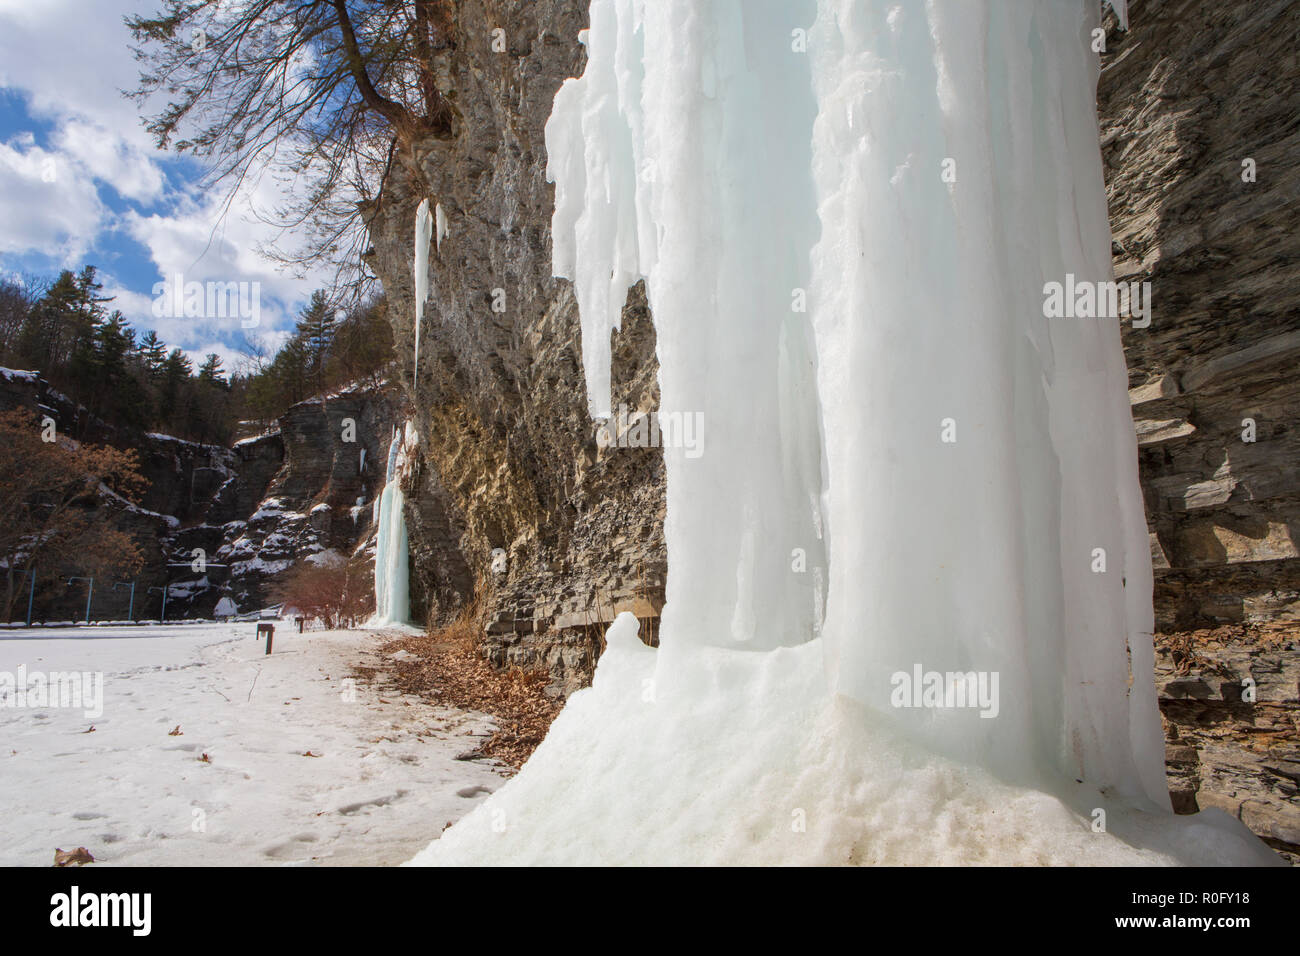 Frozen waterfalls appear on a cliff at Watkins Glen State Park, Watkins Glen, in New York State during a sunny, but cold winter day. Stock Photo